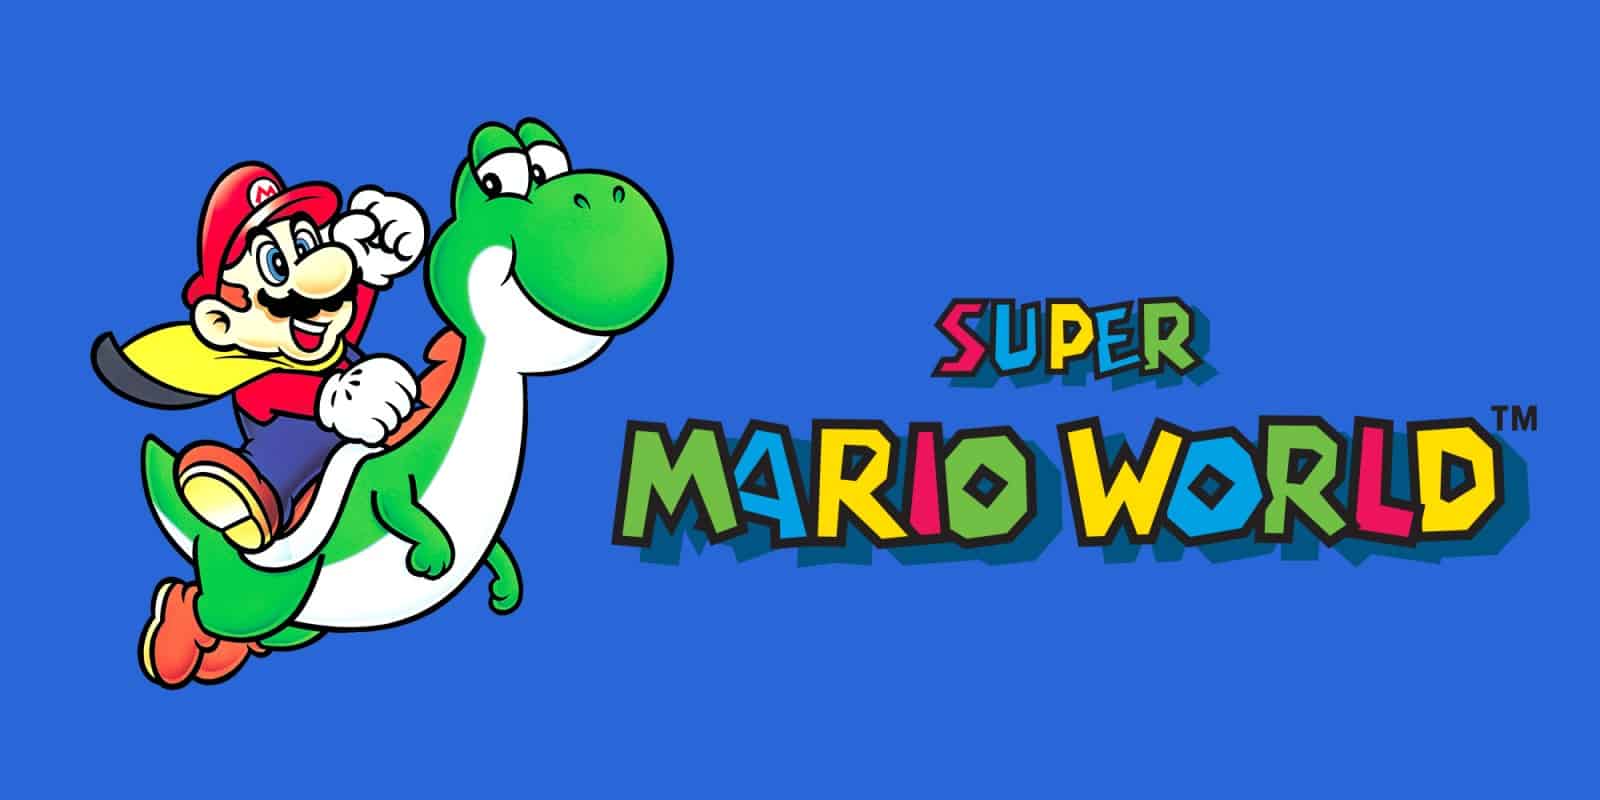 The logo for Super Mario World shows Mario with his yellow cape, riding on Yoshi's back.